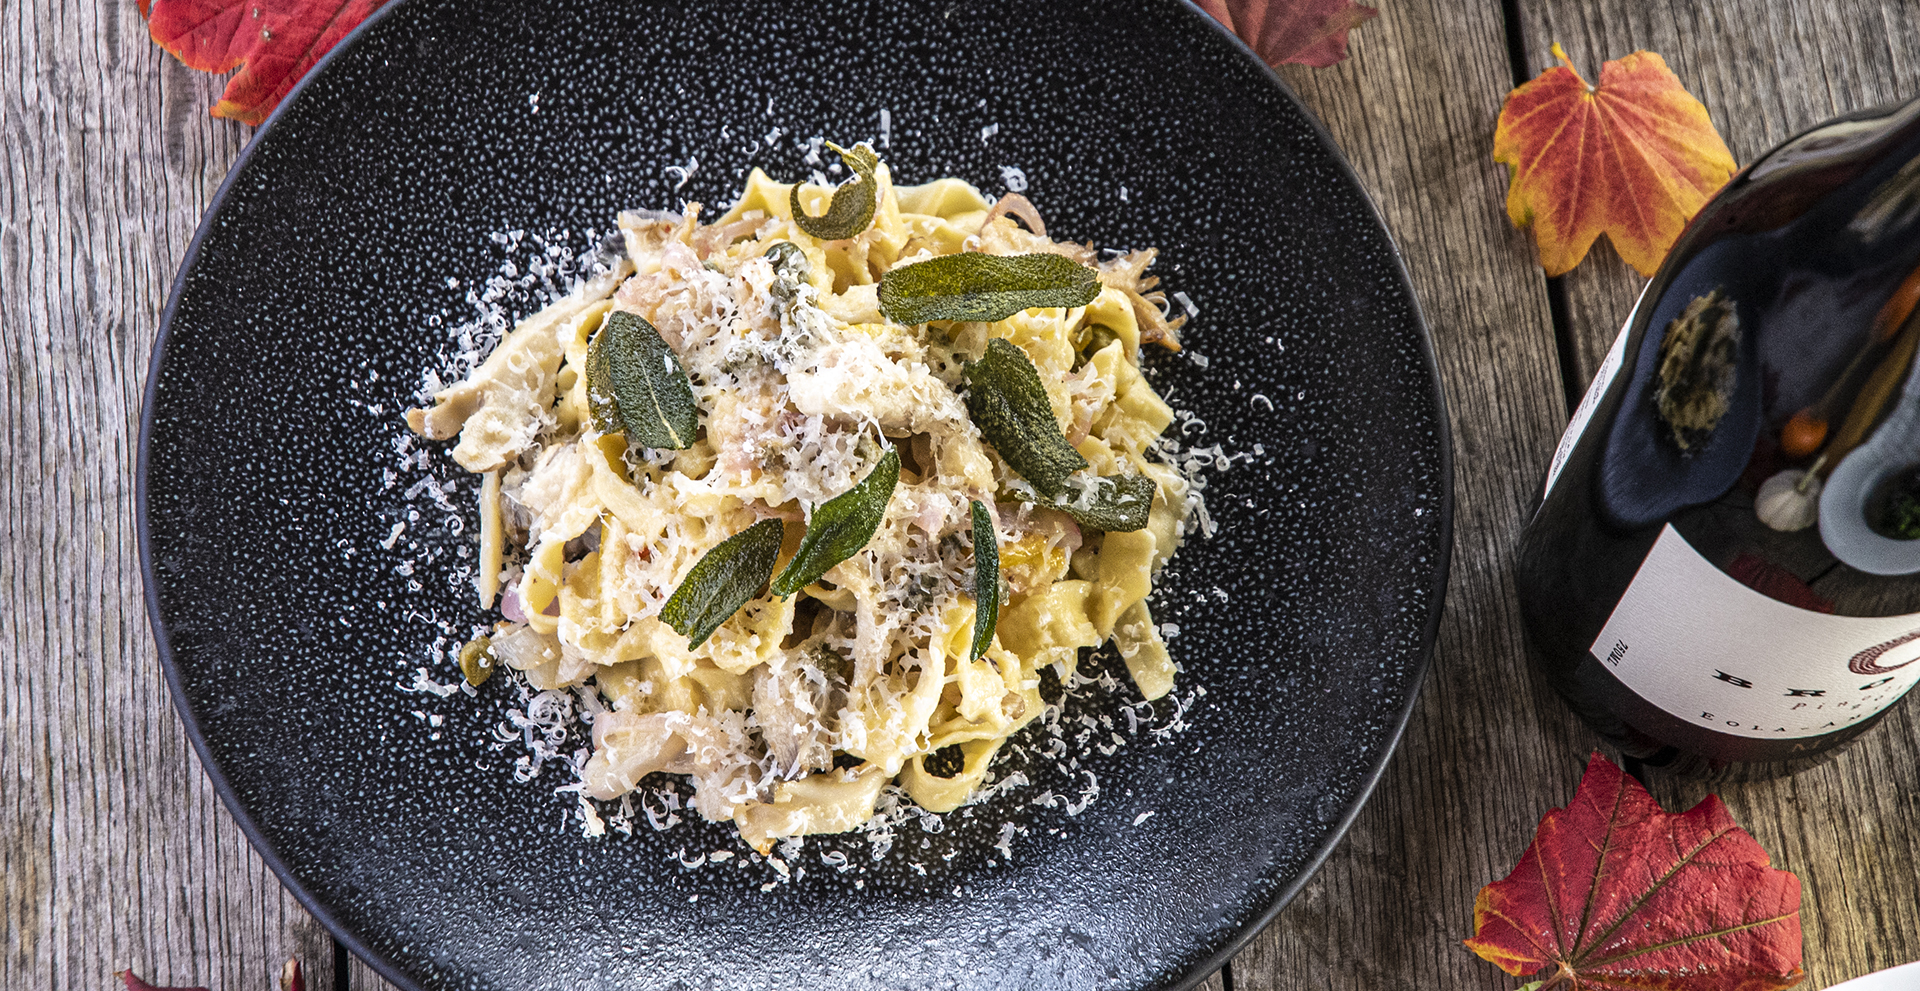 Housemade fettuccine with maitake mushrooms, capers and brown butter with sage and parmesan